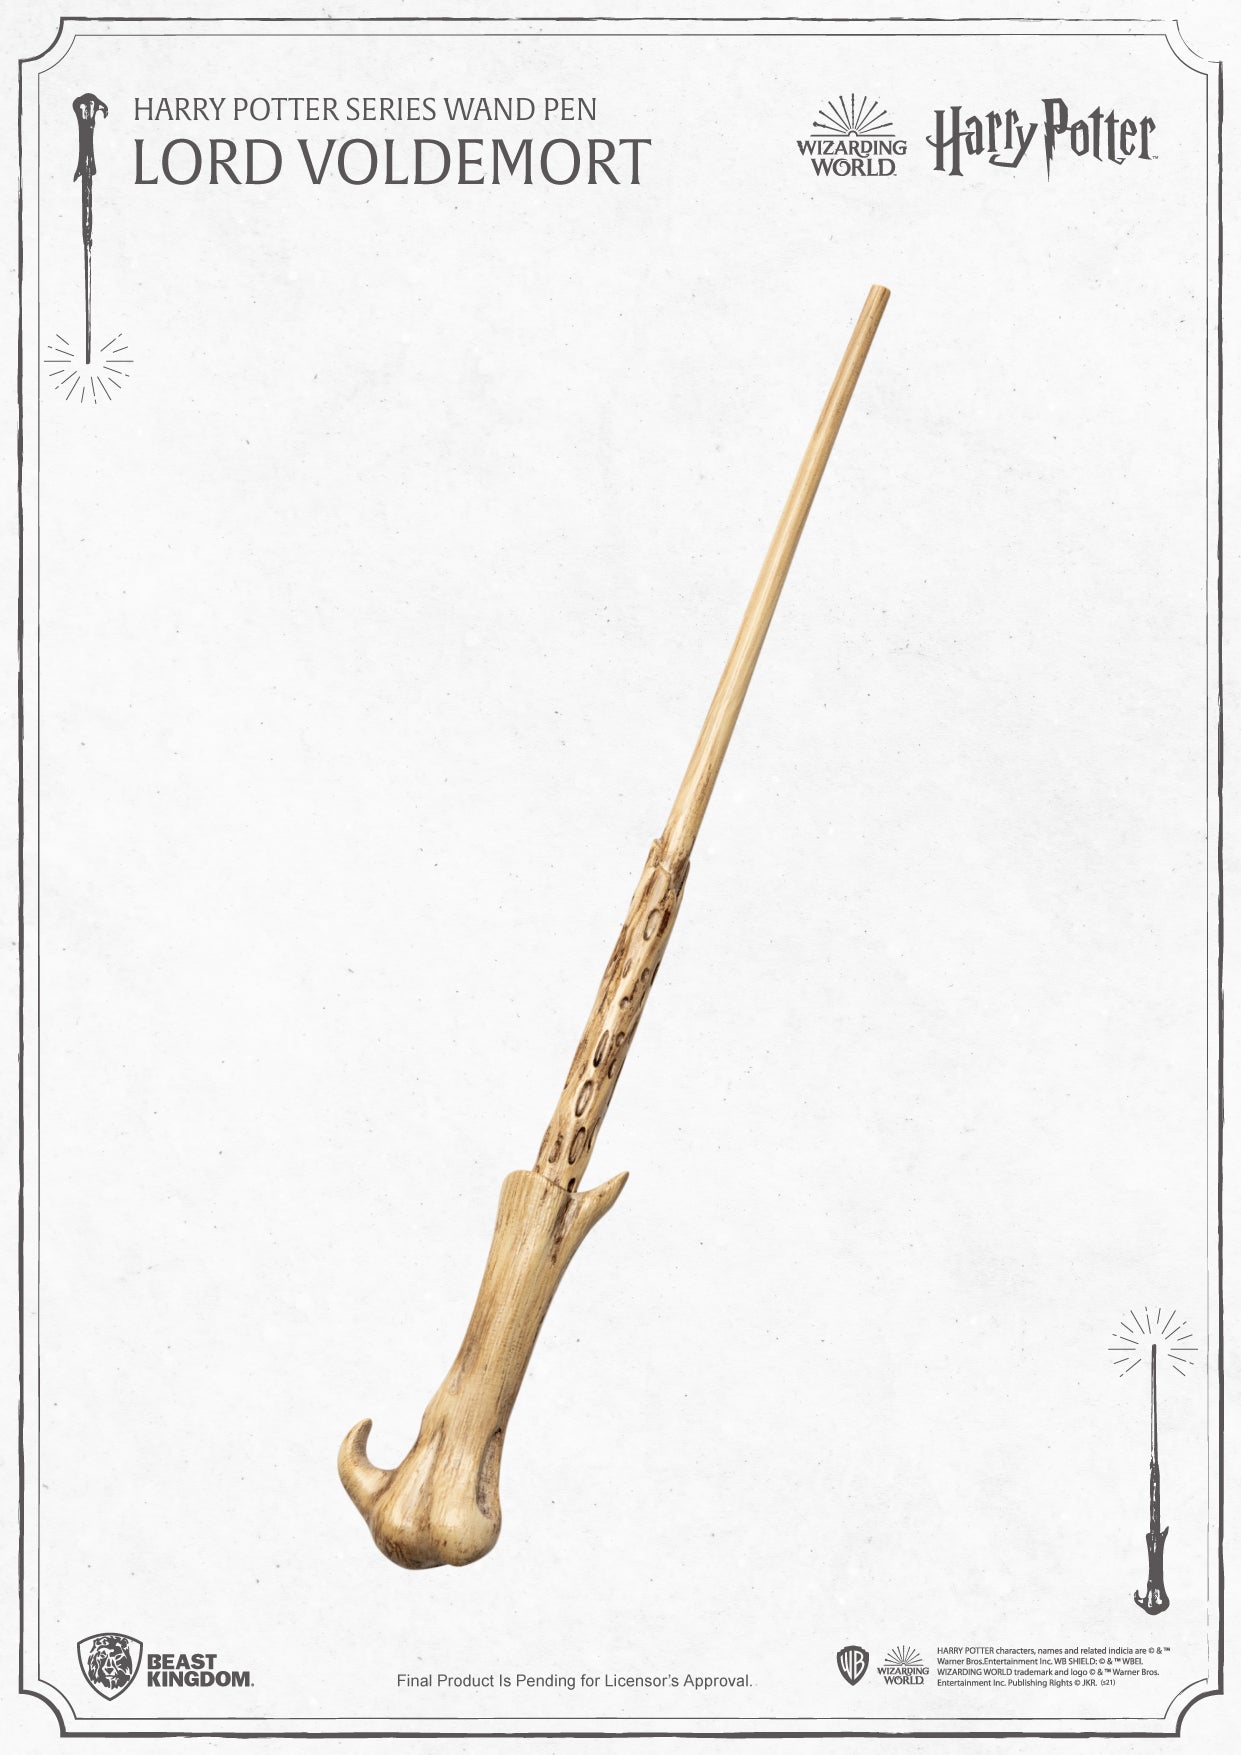 Harry Potter Series Wand Pen Lord Voldemort PEN-001-1